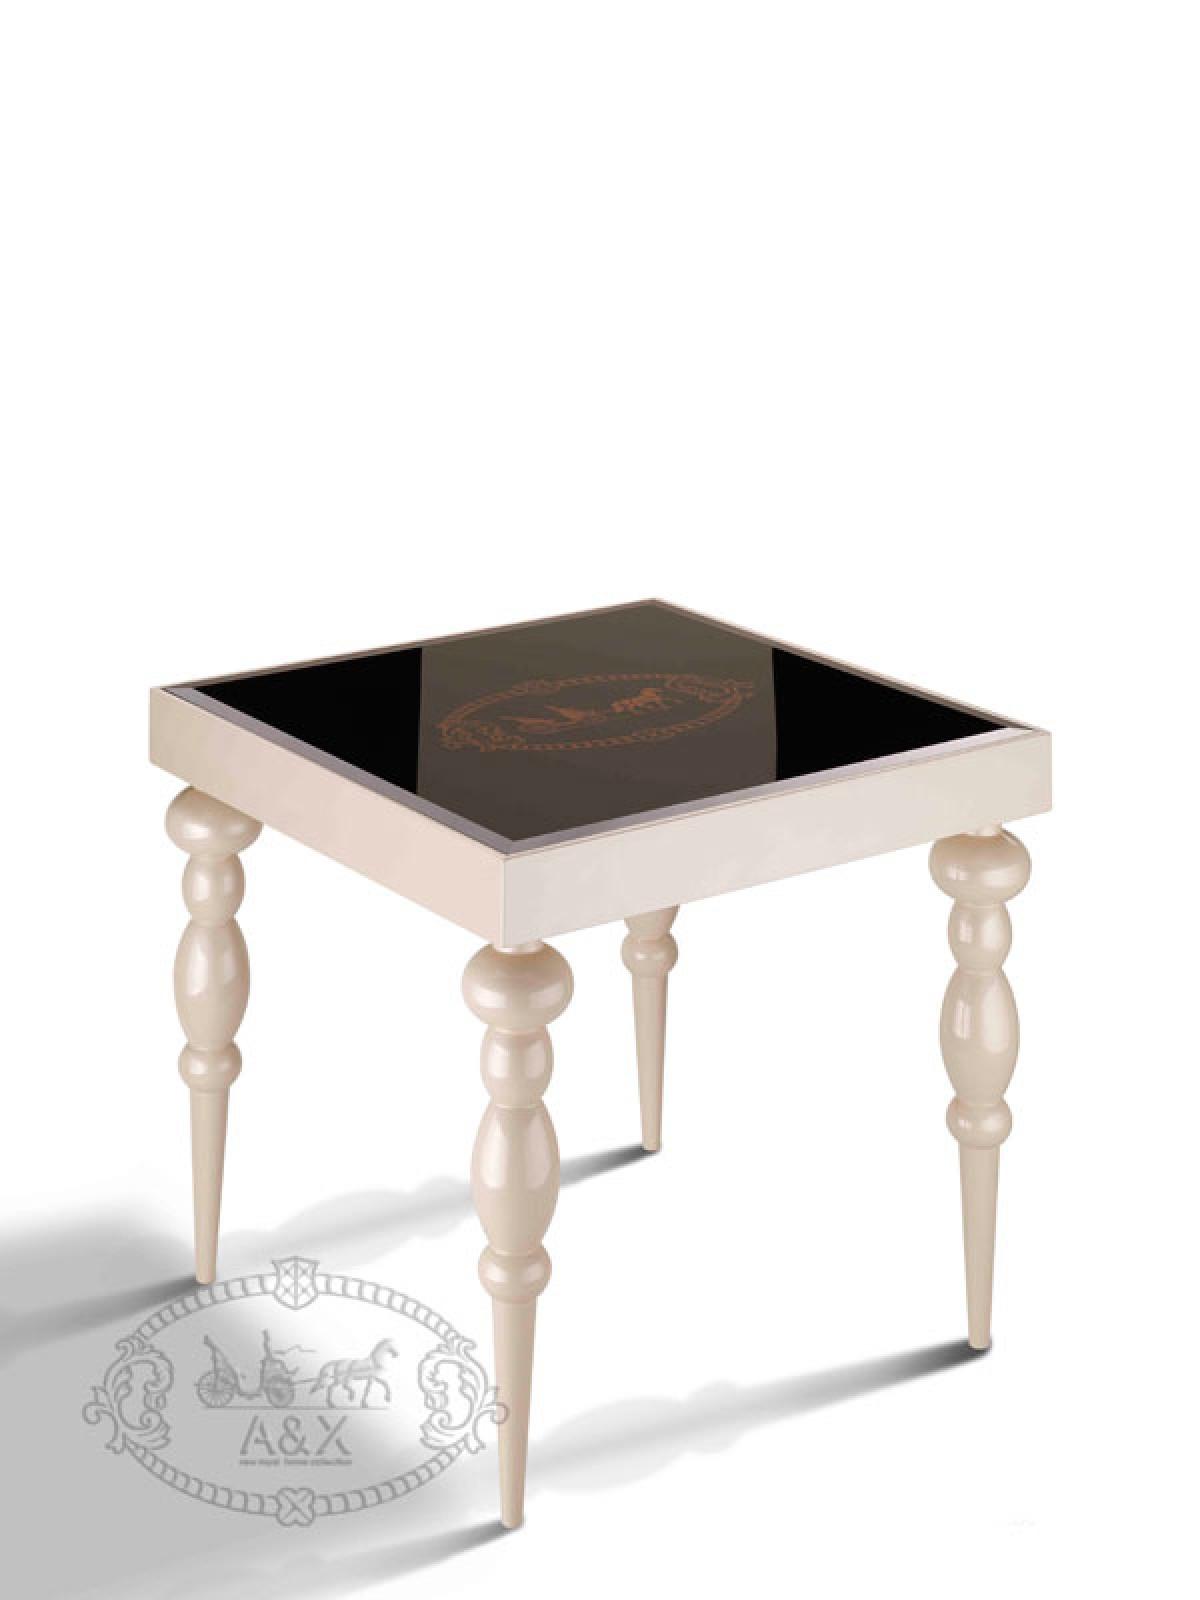 Contemporary, Transitional End Table A&X Saure VGUNRK801-2-CMP in Champagne 